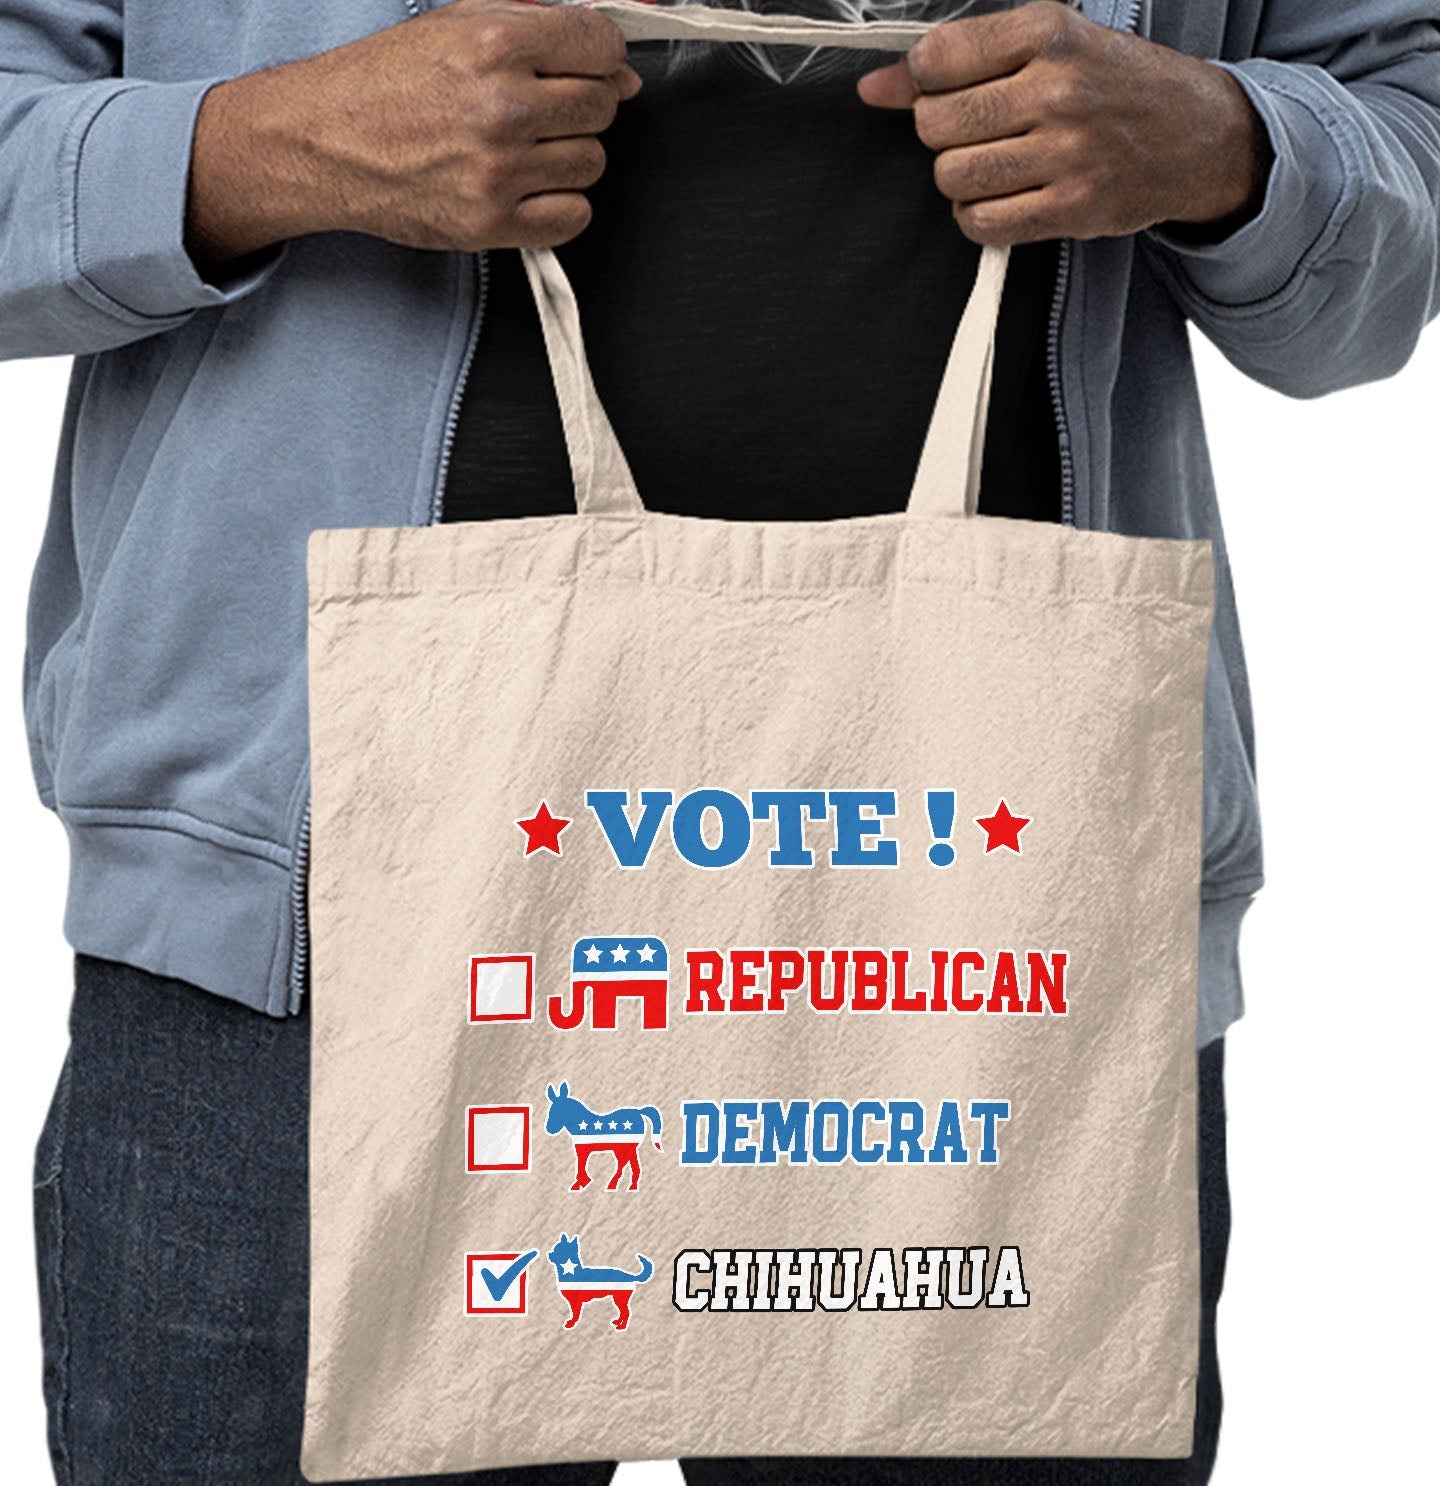 Vote for the Chihuahua (Short-Haired) - Cotton Canvas Tote